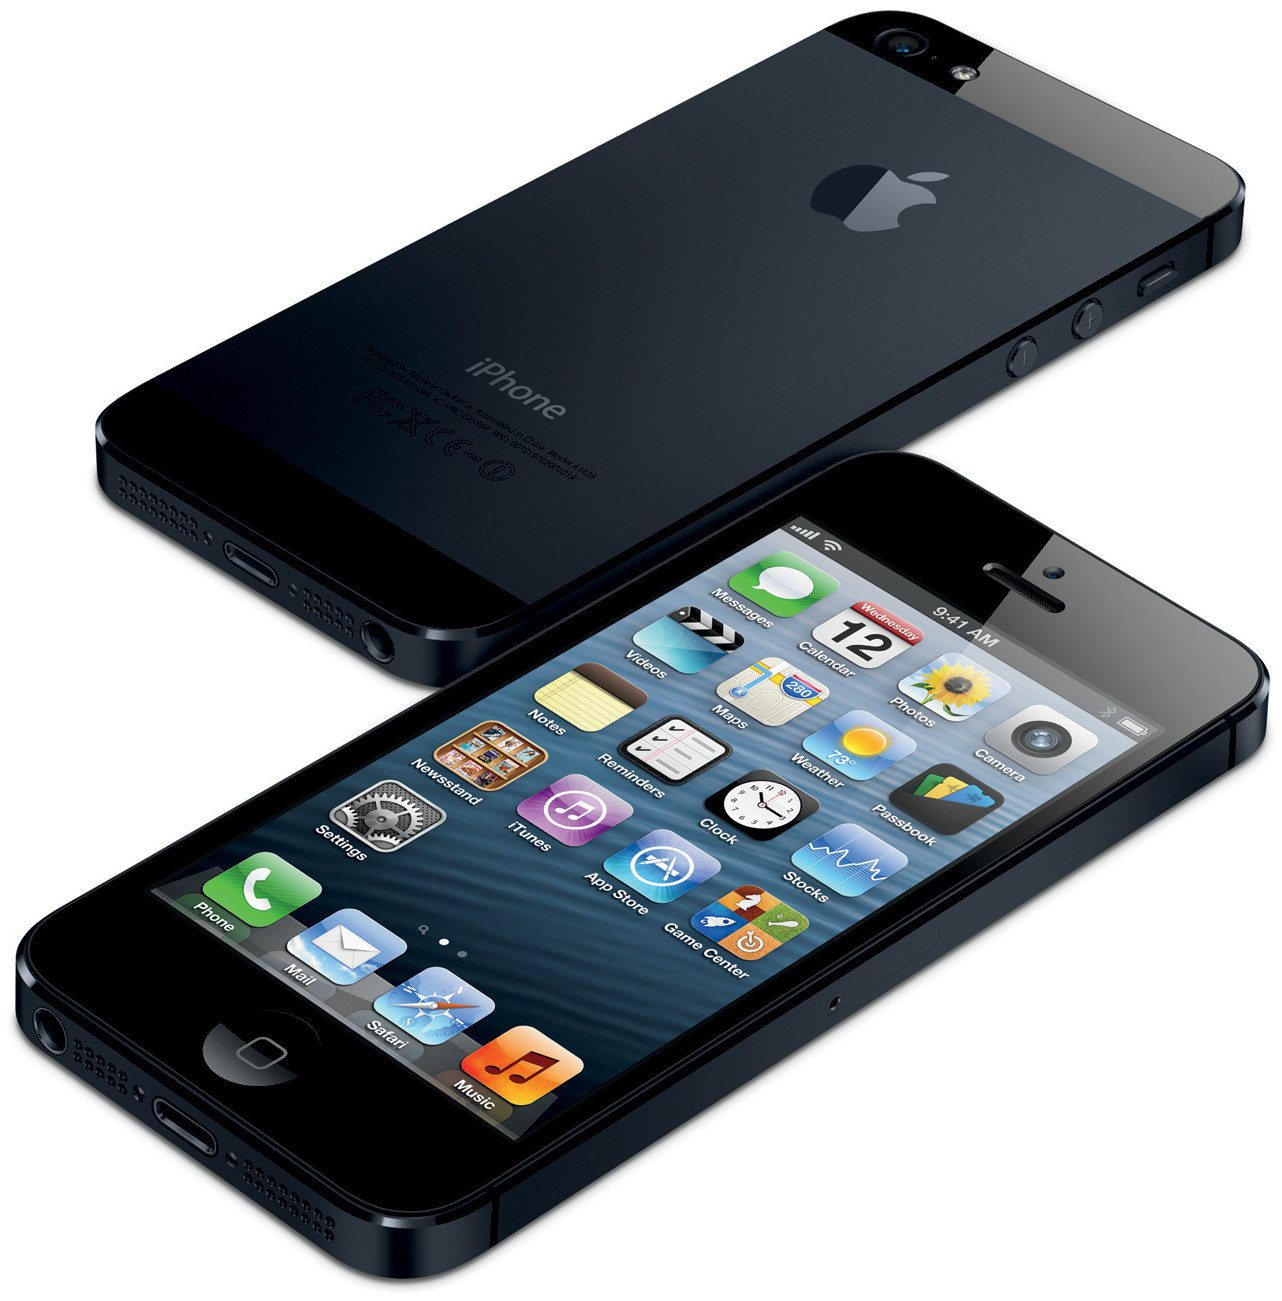 apple iphone 4 8gb software free download